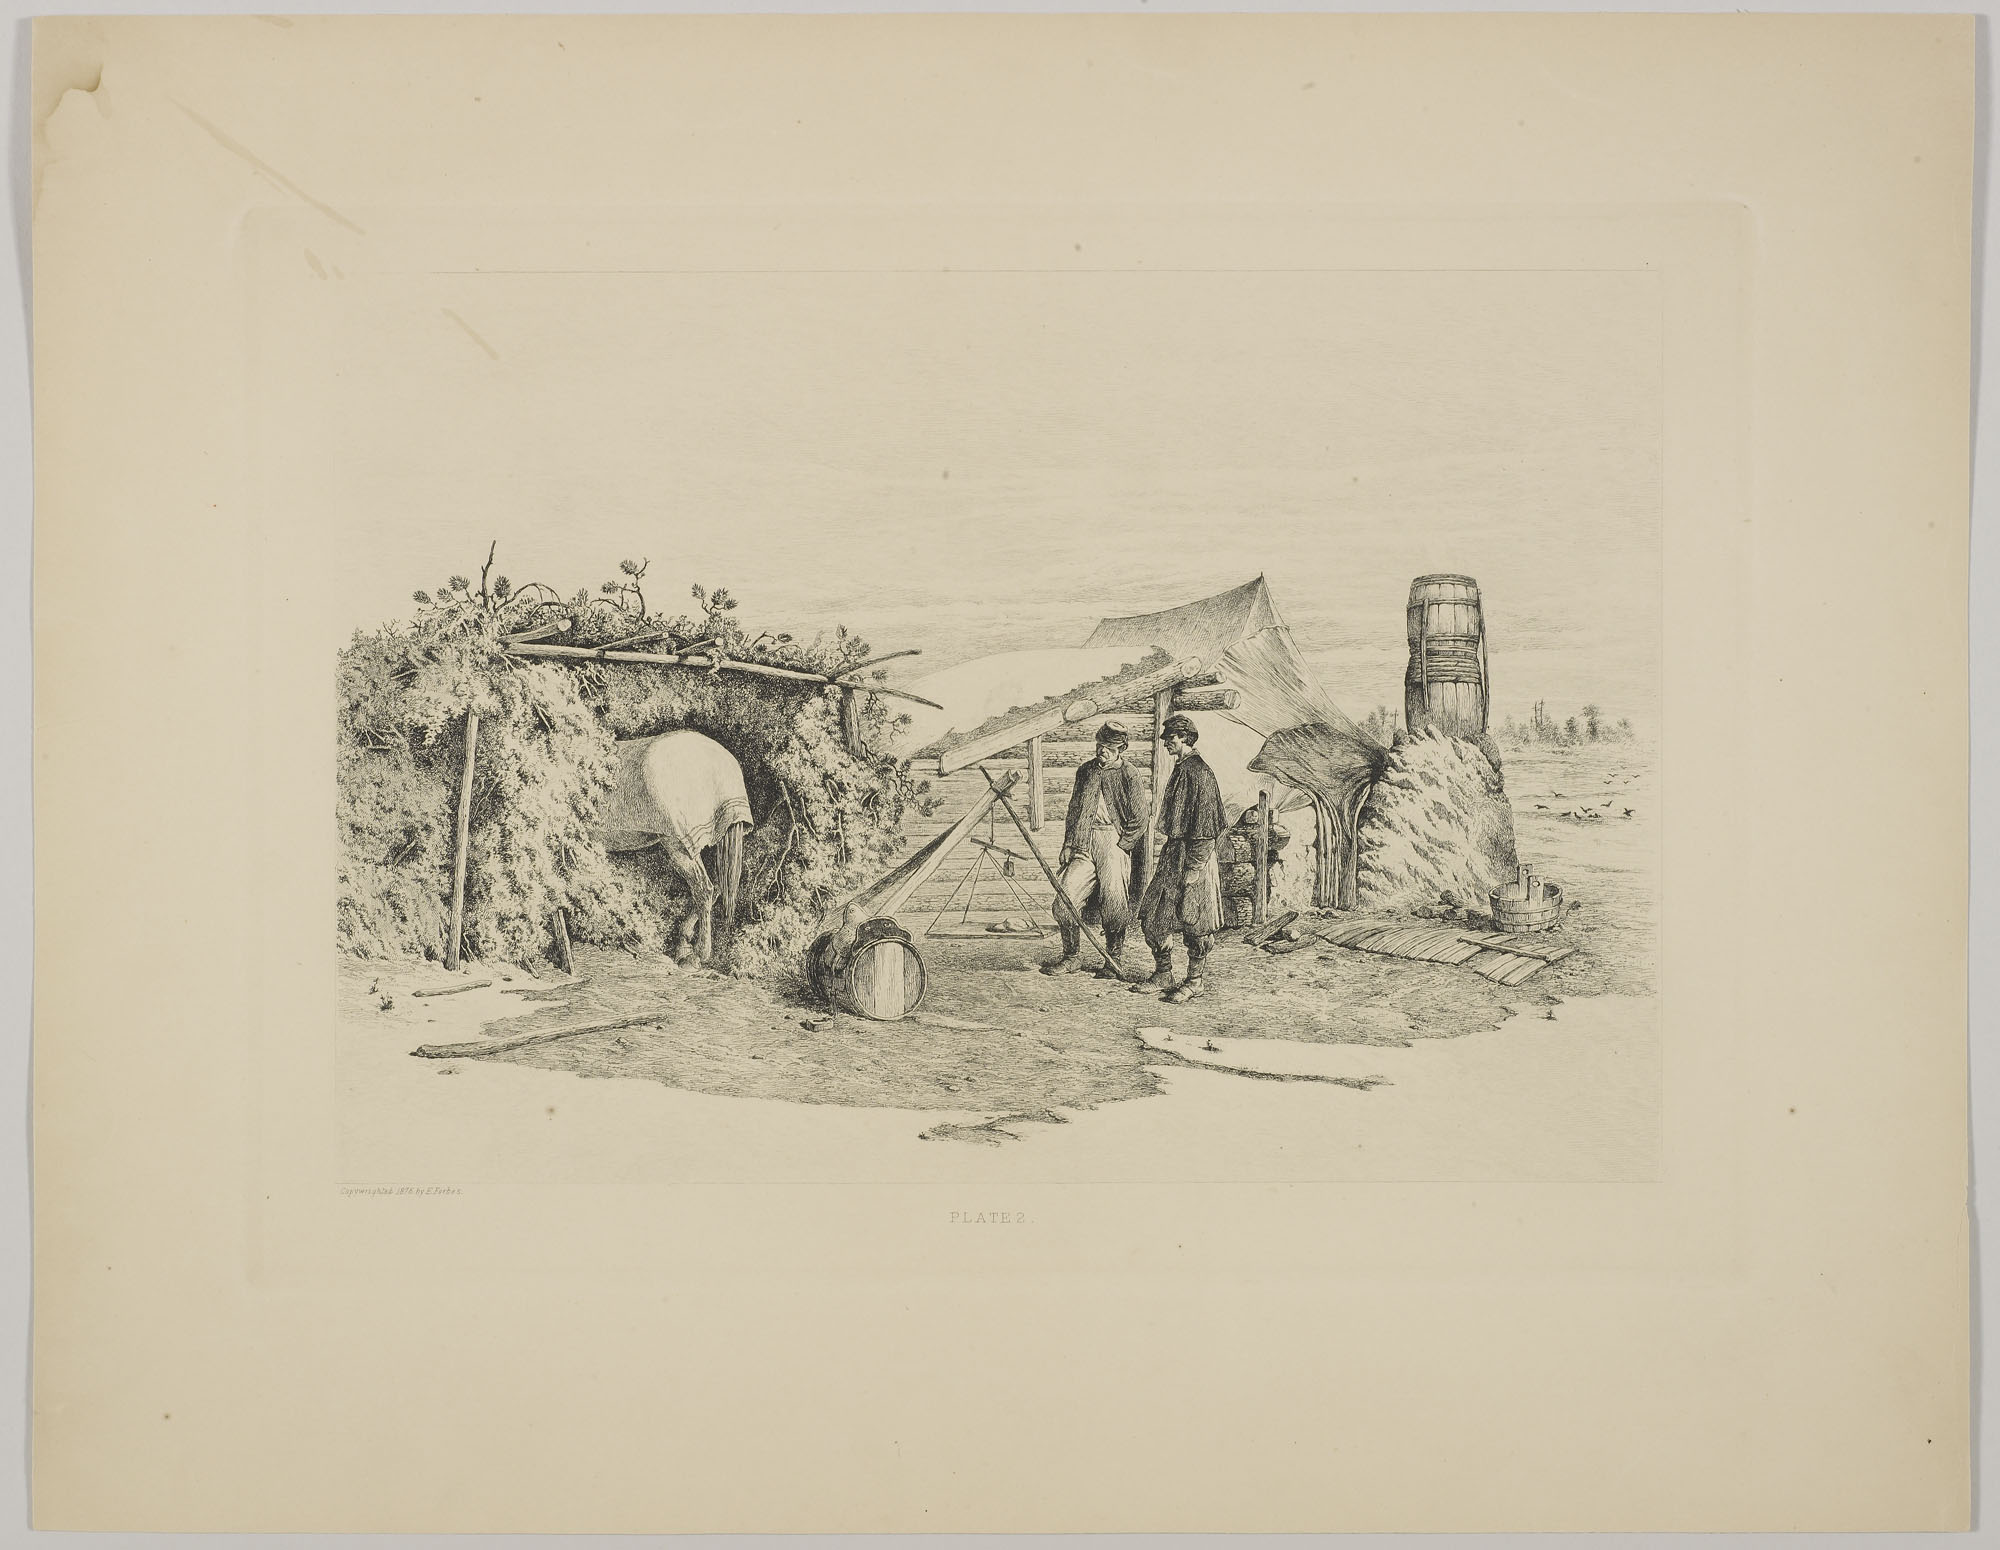 Edwin Forbes, The Commissary's Quarters in Winter Camp, 1876, etching, 18 x 24 inches (Chicago Public Library)